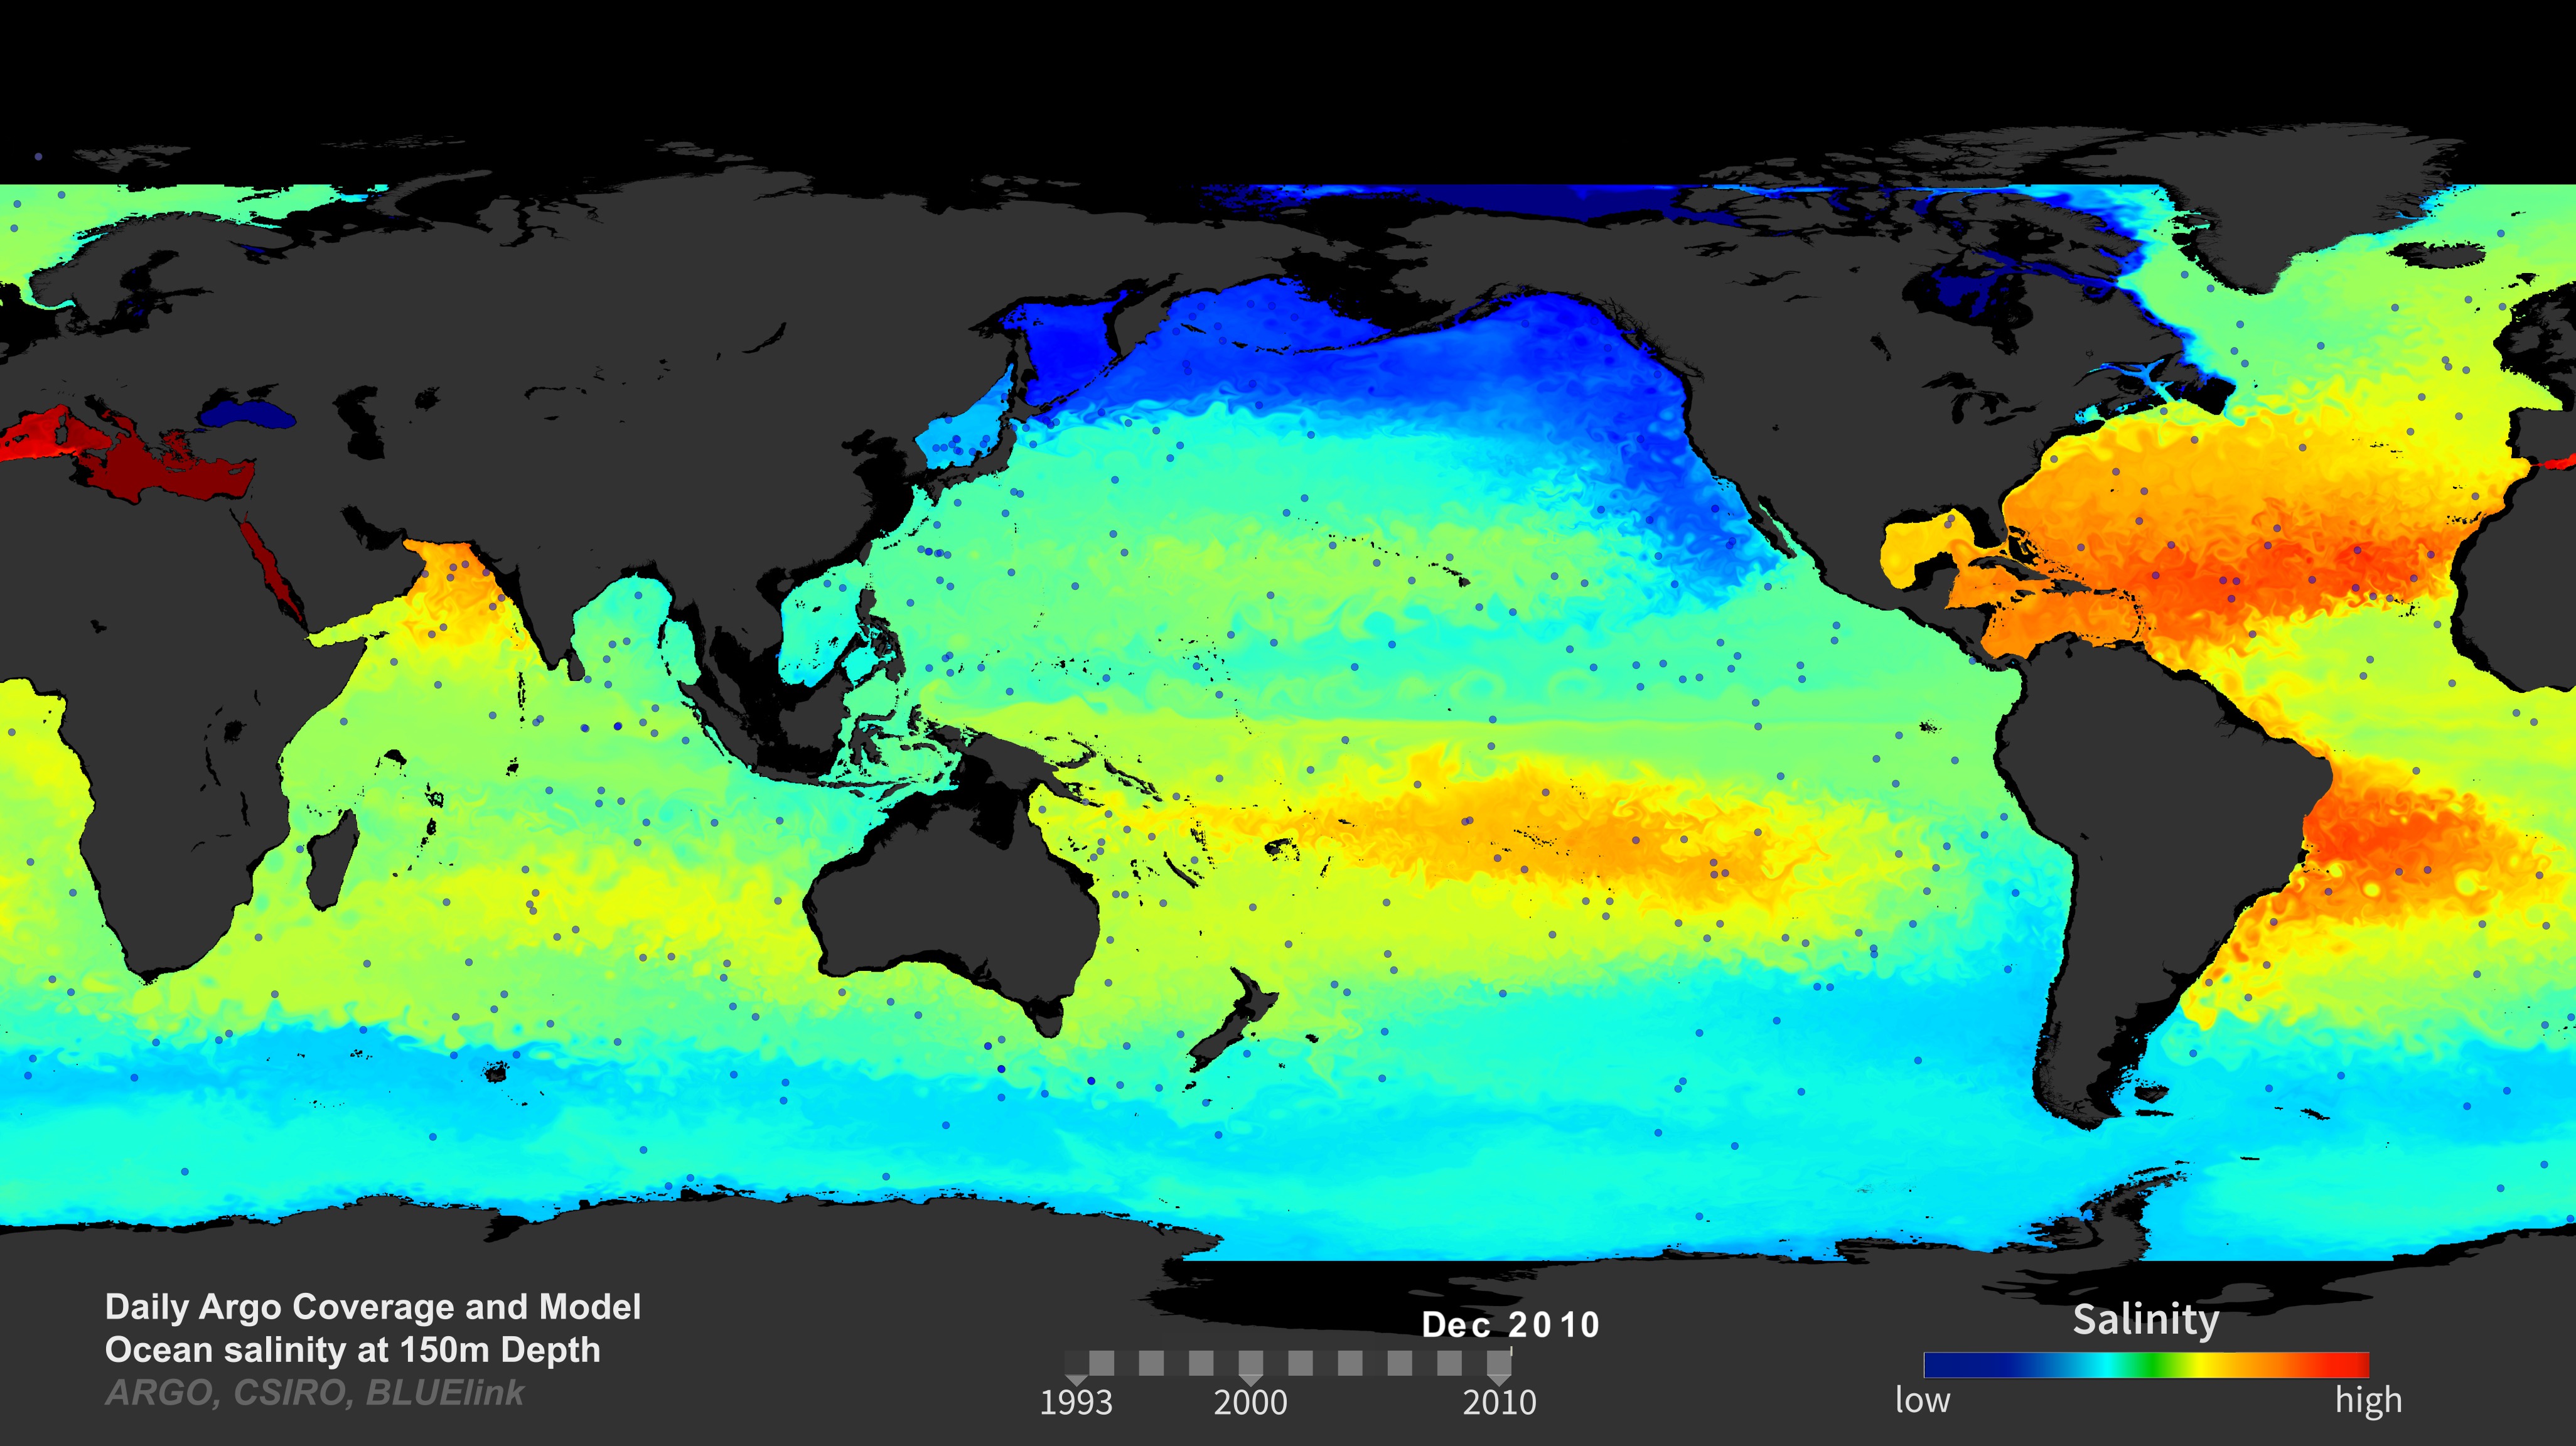 Modeled ocean salinity and daily locations of Argo floats, 1993 to 2010.